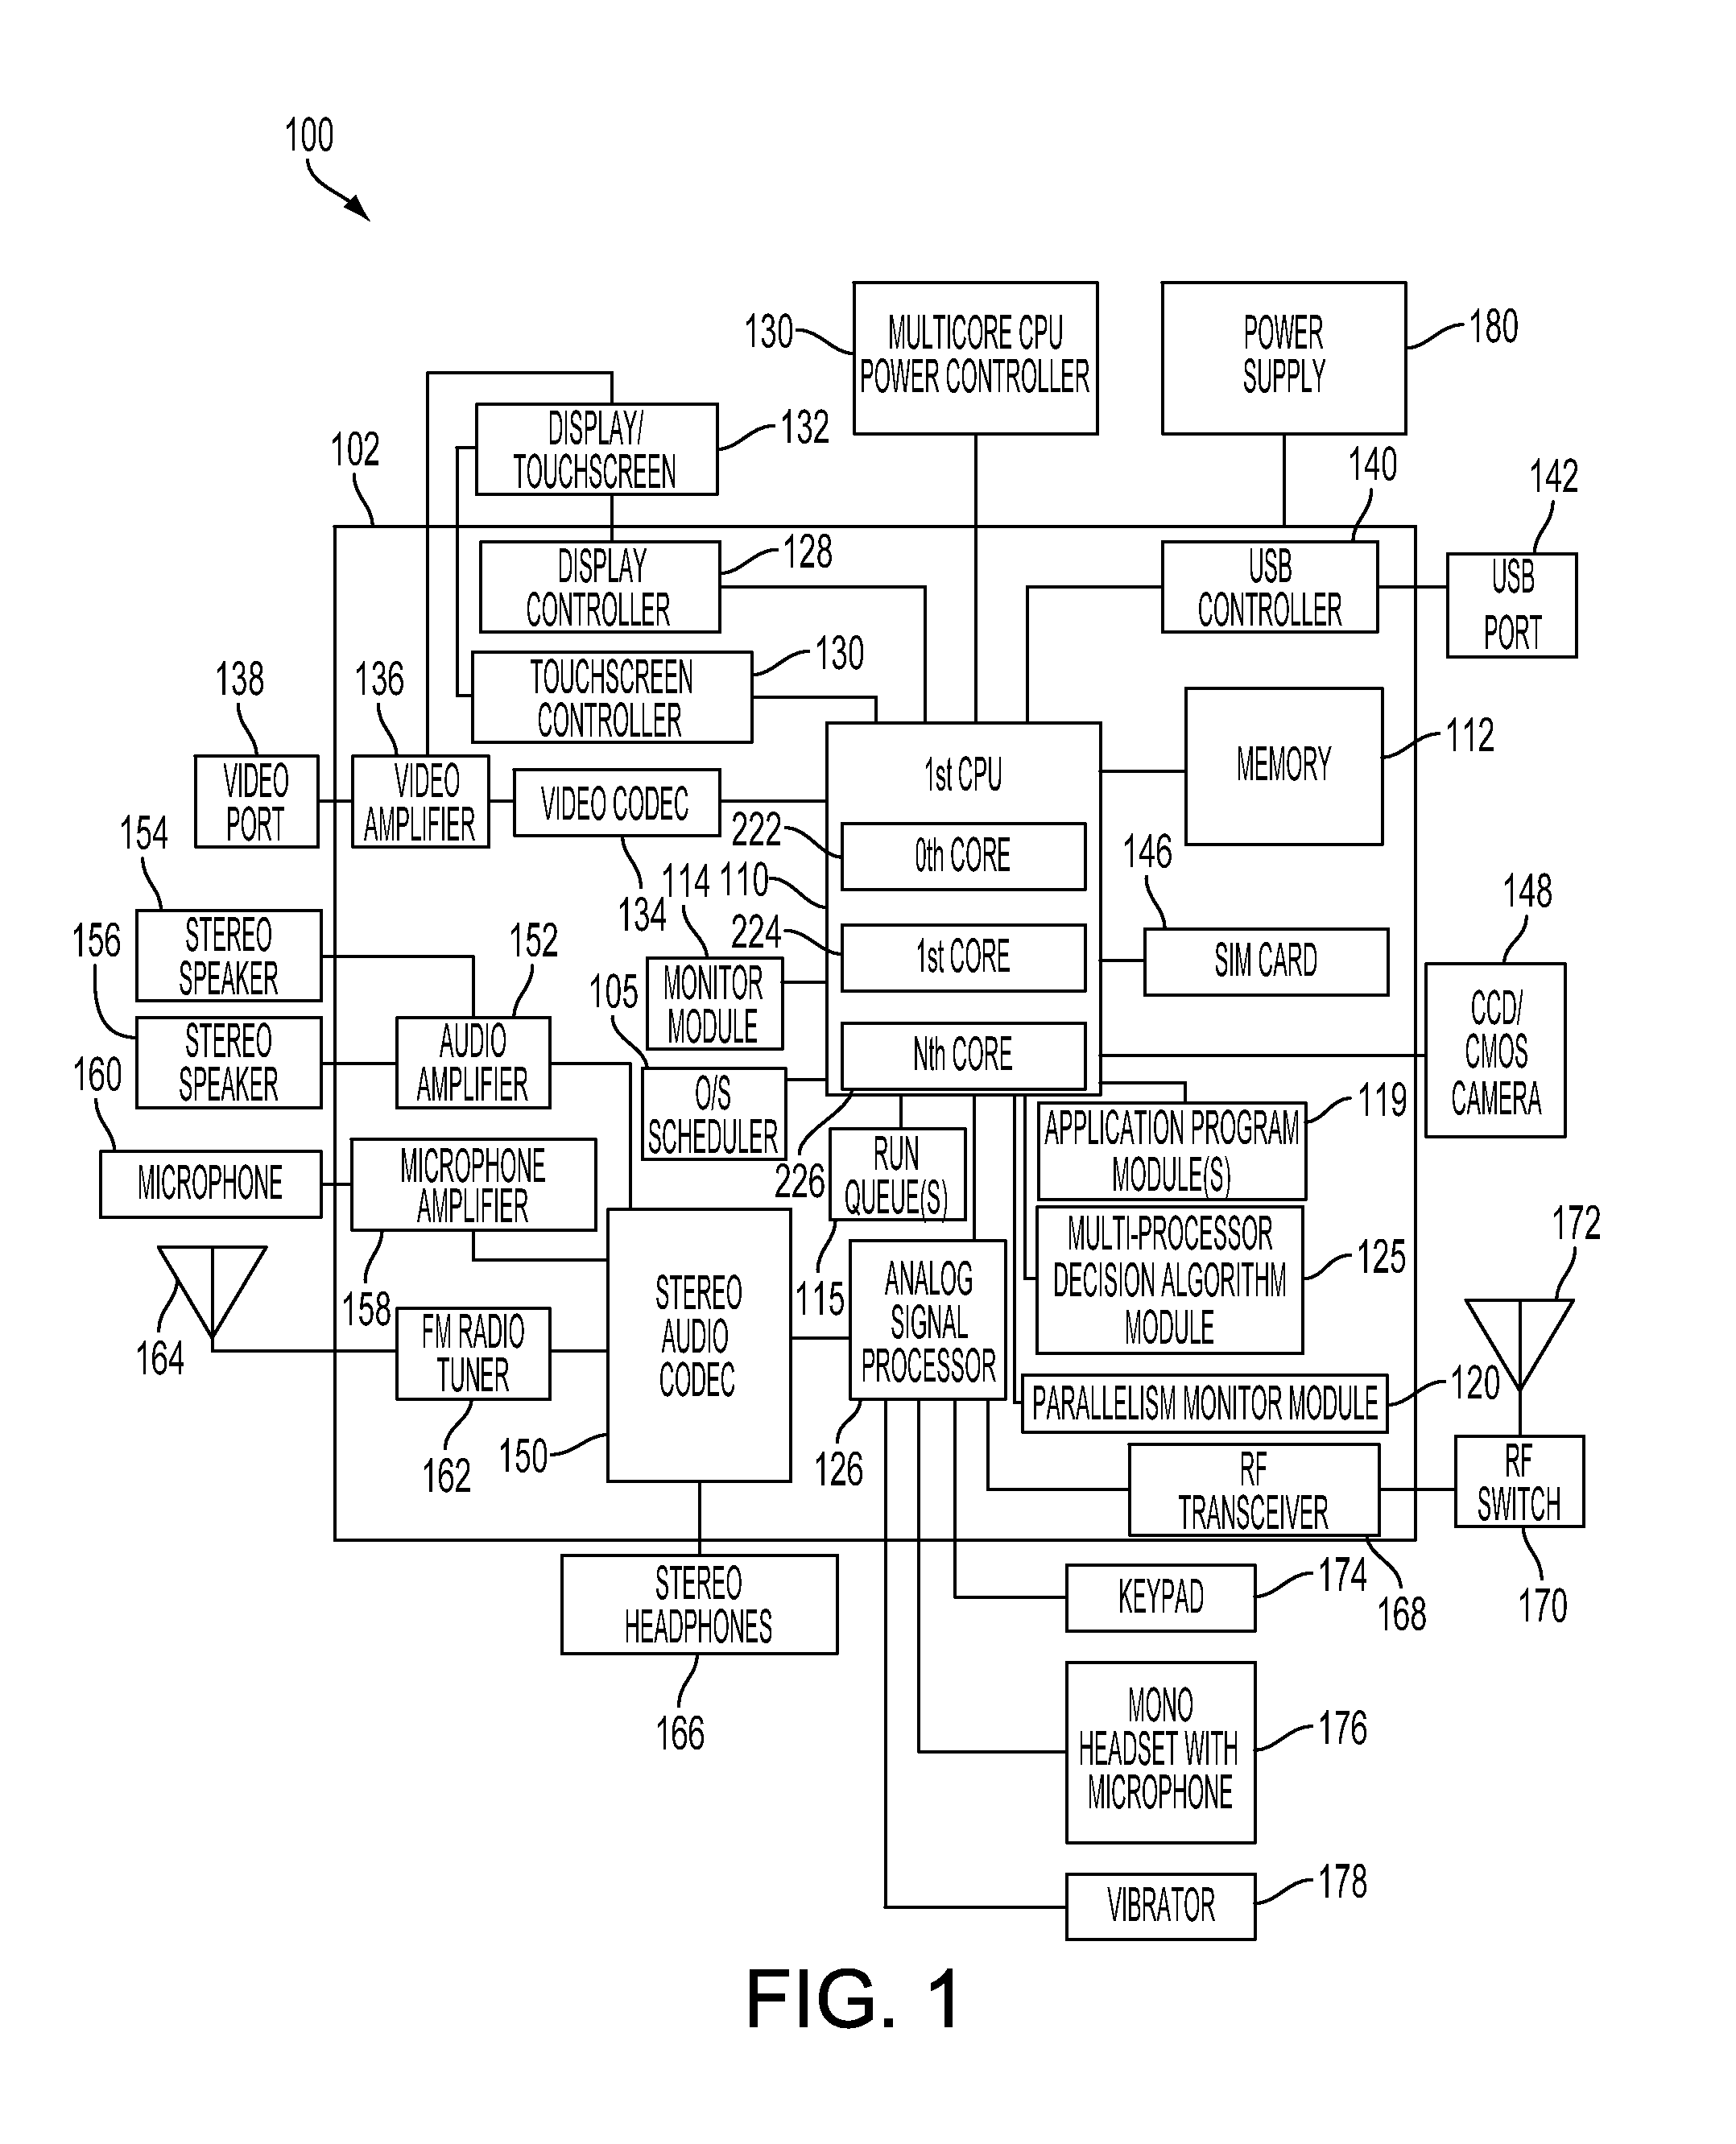 Method and system for dynamically controlling power to multiple cores in a multicore processor of a portable computing device